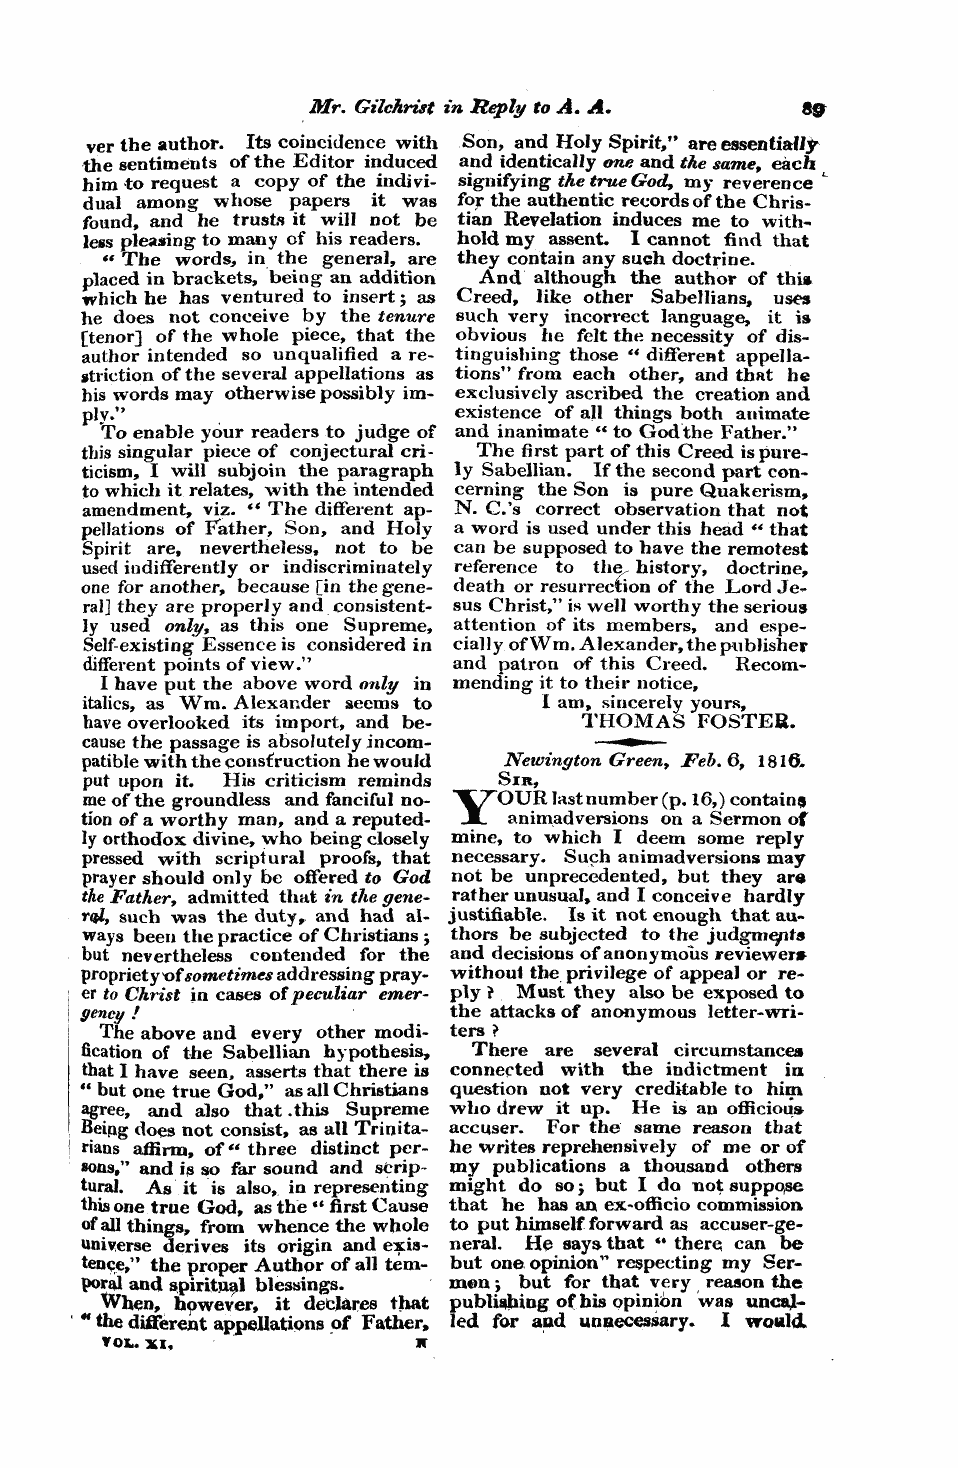 Monthly Repository (1806-1838) and Unitarian Chronicle (1832-1833): F Y, 1st edition: 25